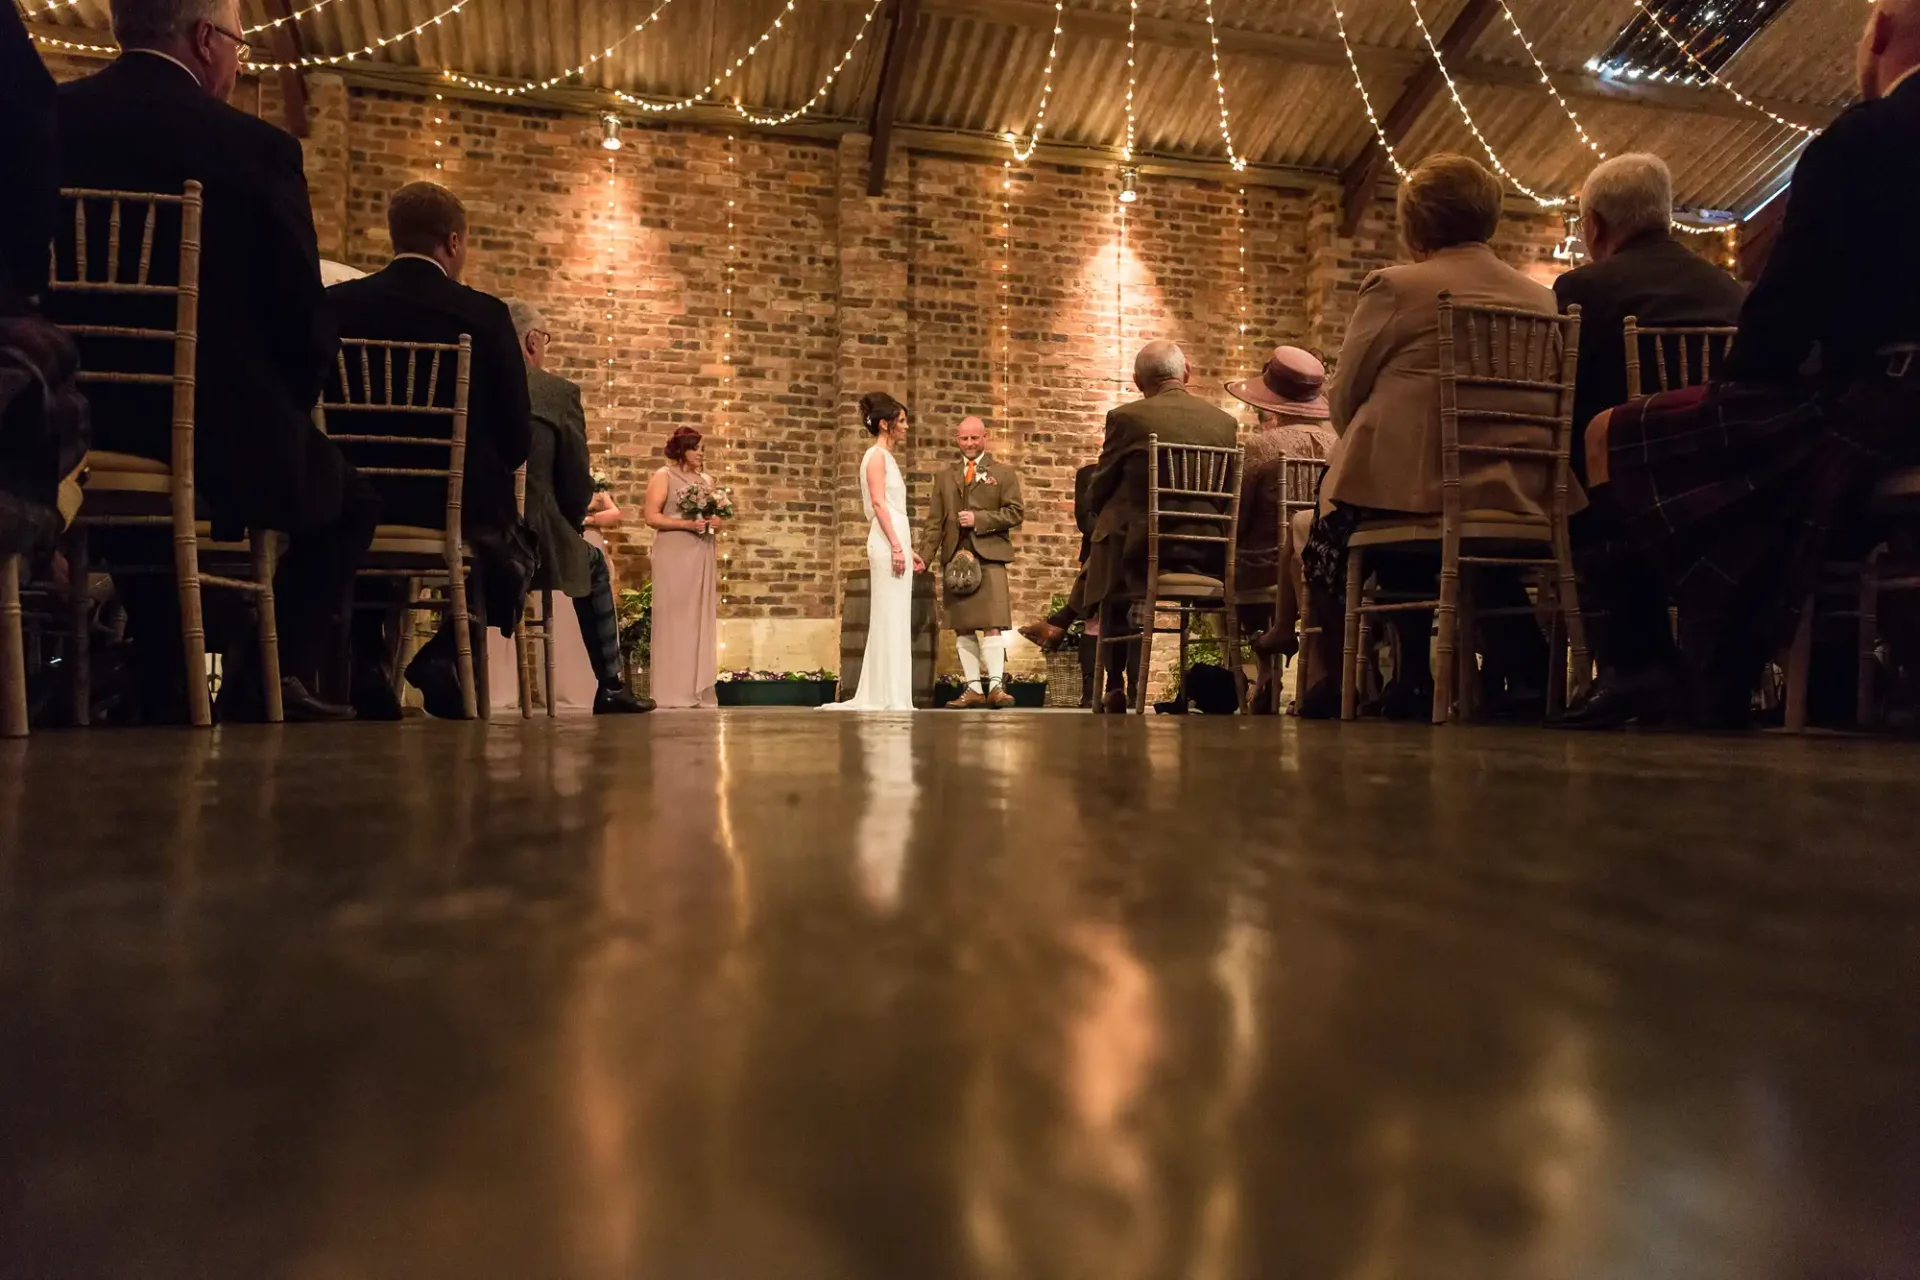 A couple stands in front of an officiant during a wedding ceremony in a brick-walled venue, viewed from the floor level among seated guests.